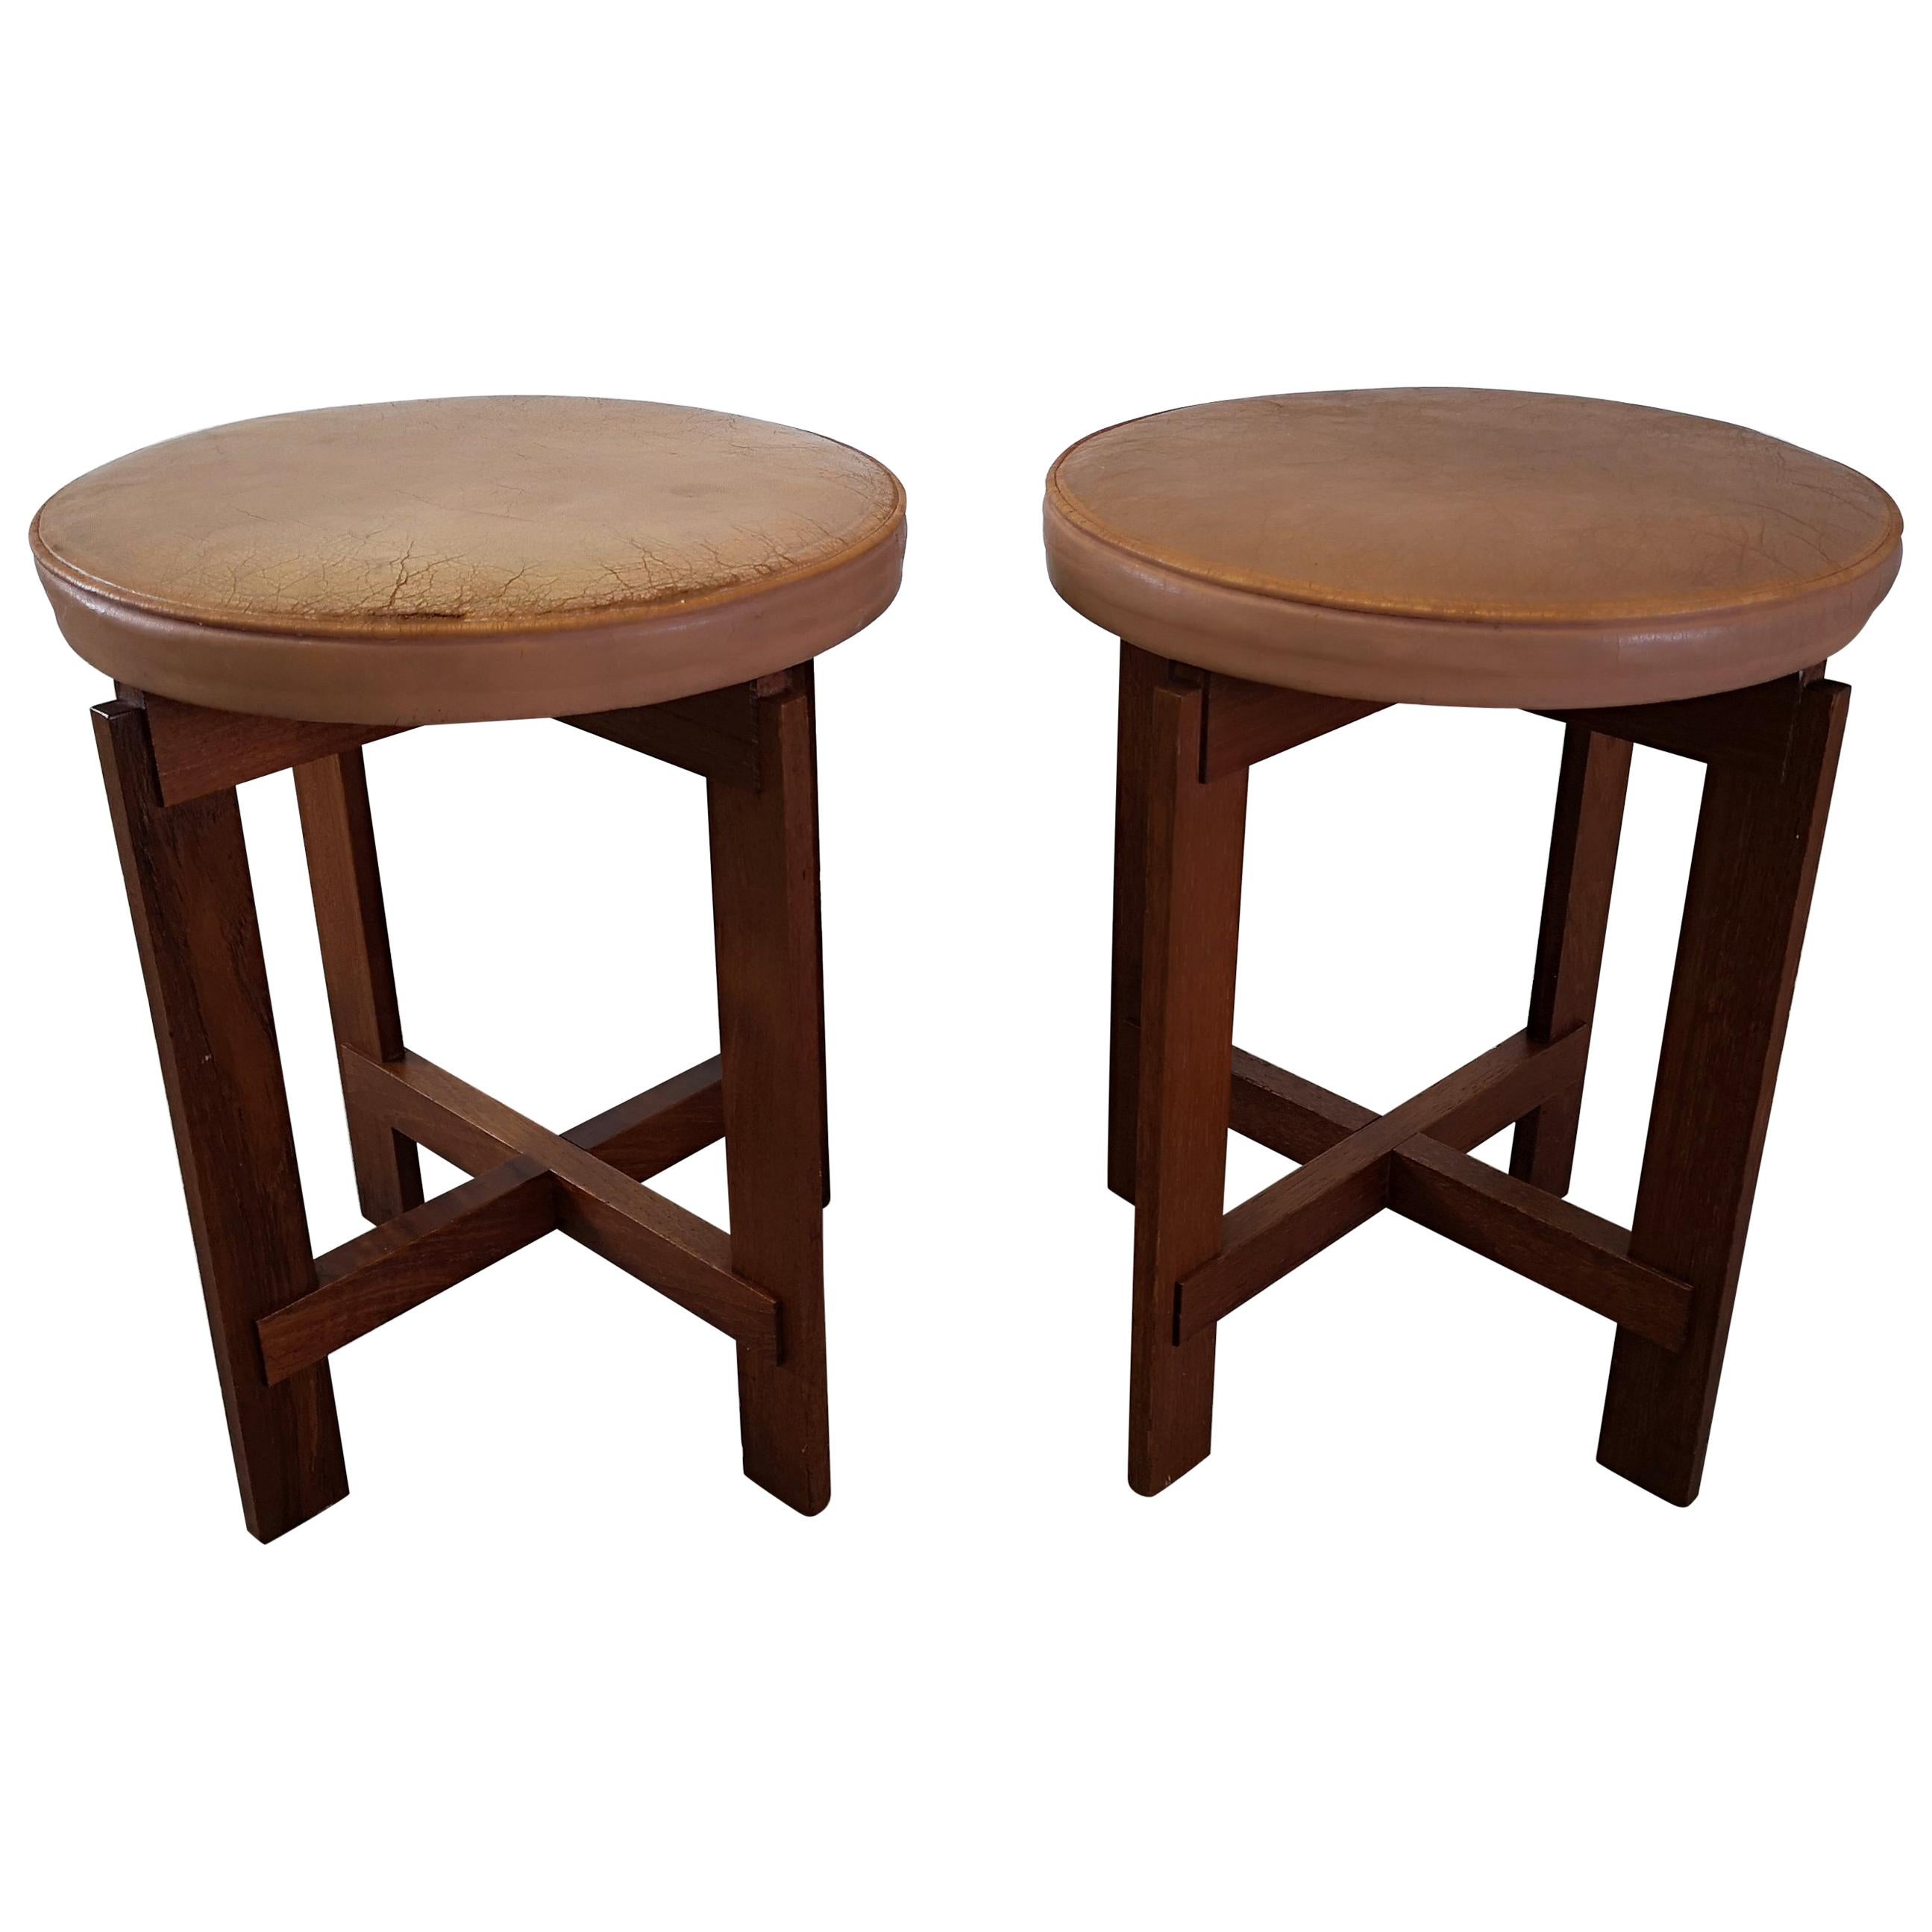 These stools in teak with seats in leather was designed by Uno & Östen Kristiansson for Luxus, Sweden.
The teak part is in excellent condition. The seats has a vintage wear and one of them more wear than the other.

Good vintage condition.